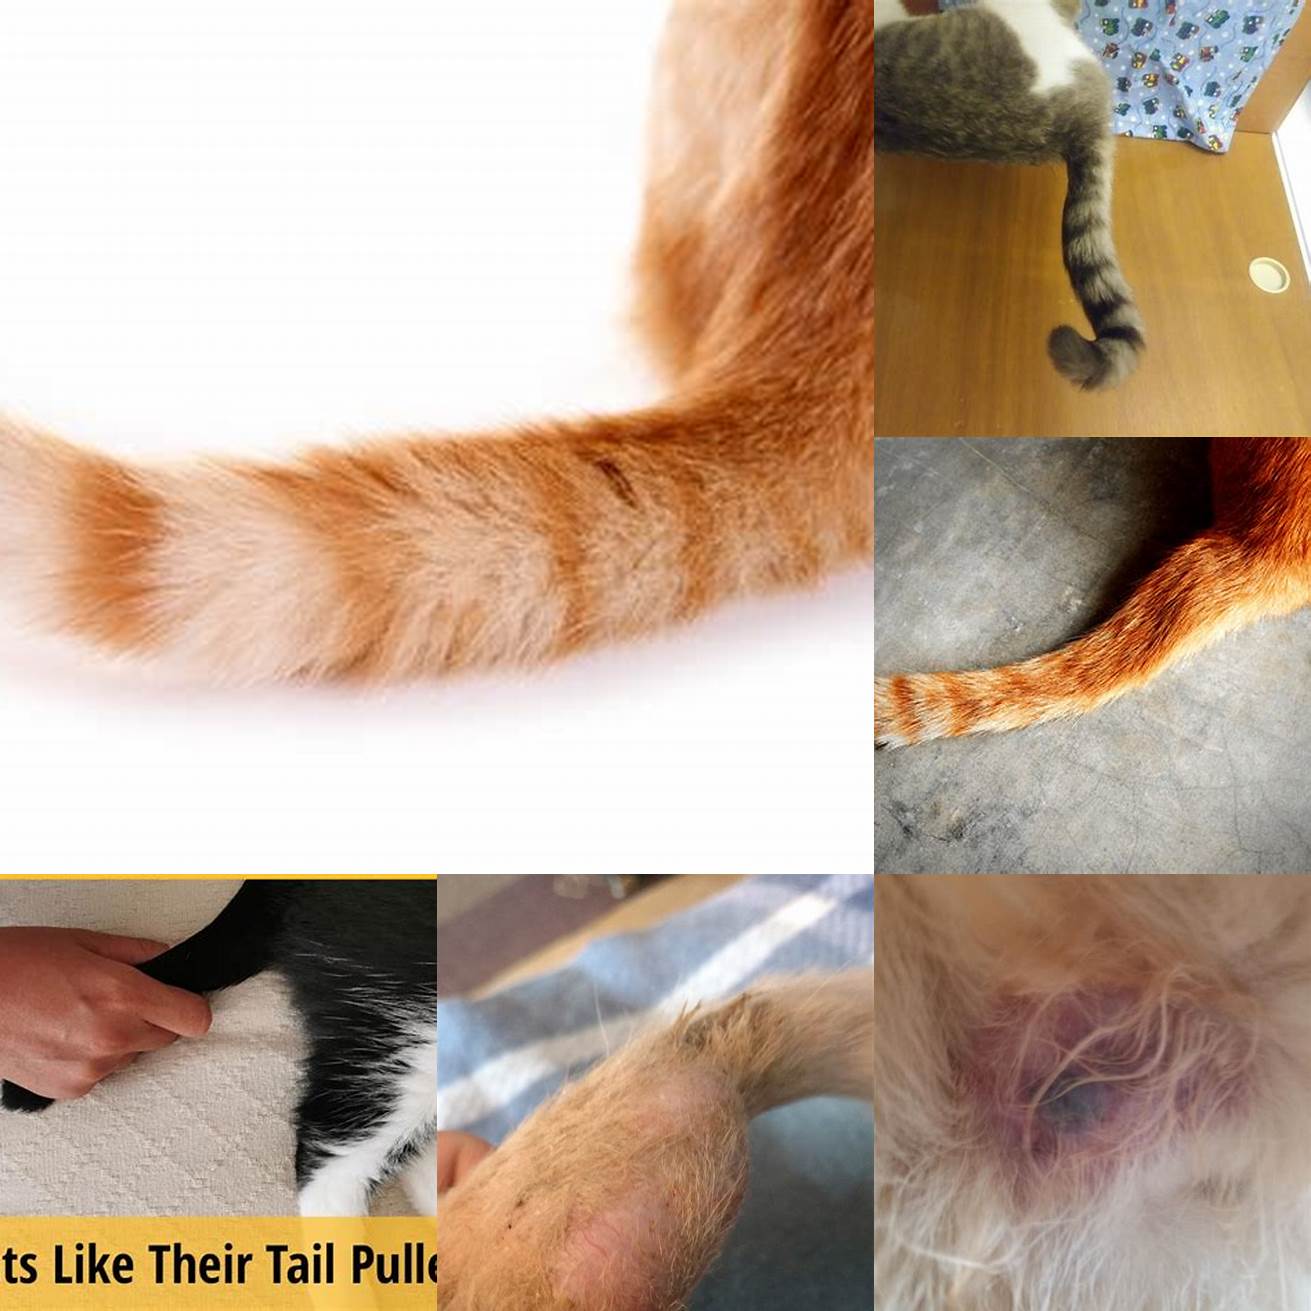 Swelling or bruising of the tail